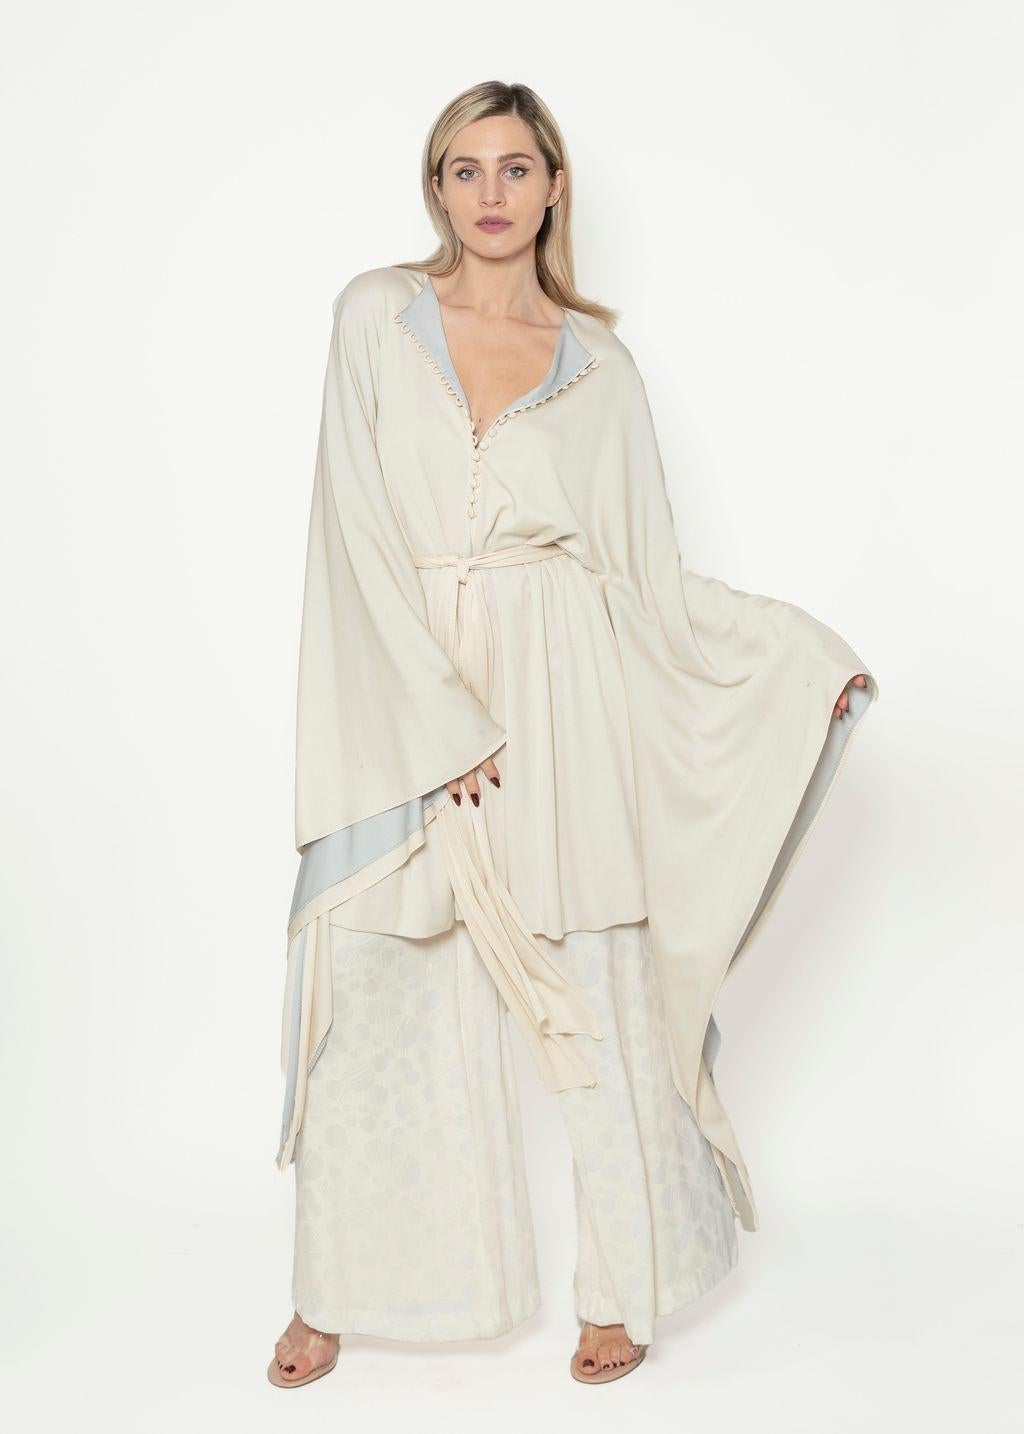 Our Documented 1974 Giorgio Di Sant Angelo Taupe Angel Sleeve Belted Dress is sure to command the eyes of everyone in the room!

It features very large double layered Angel sleeves.  Perfect to style as a dress or jacket, the piece does not fully